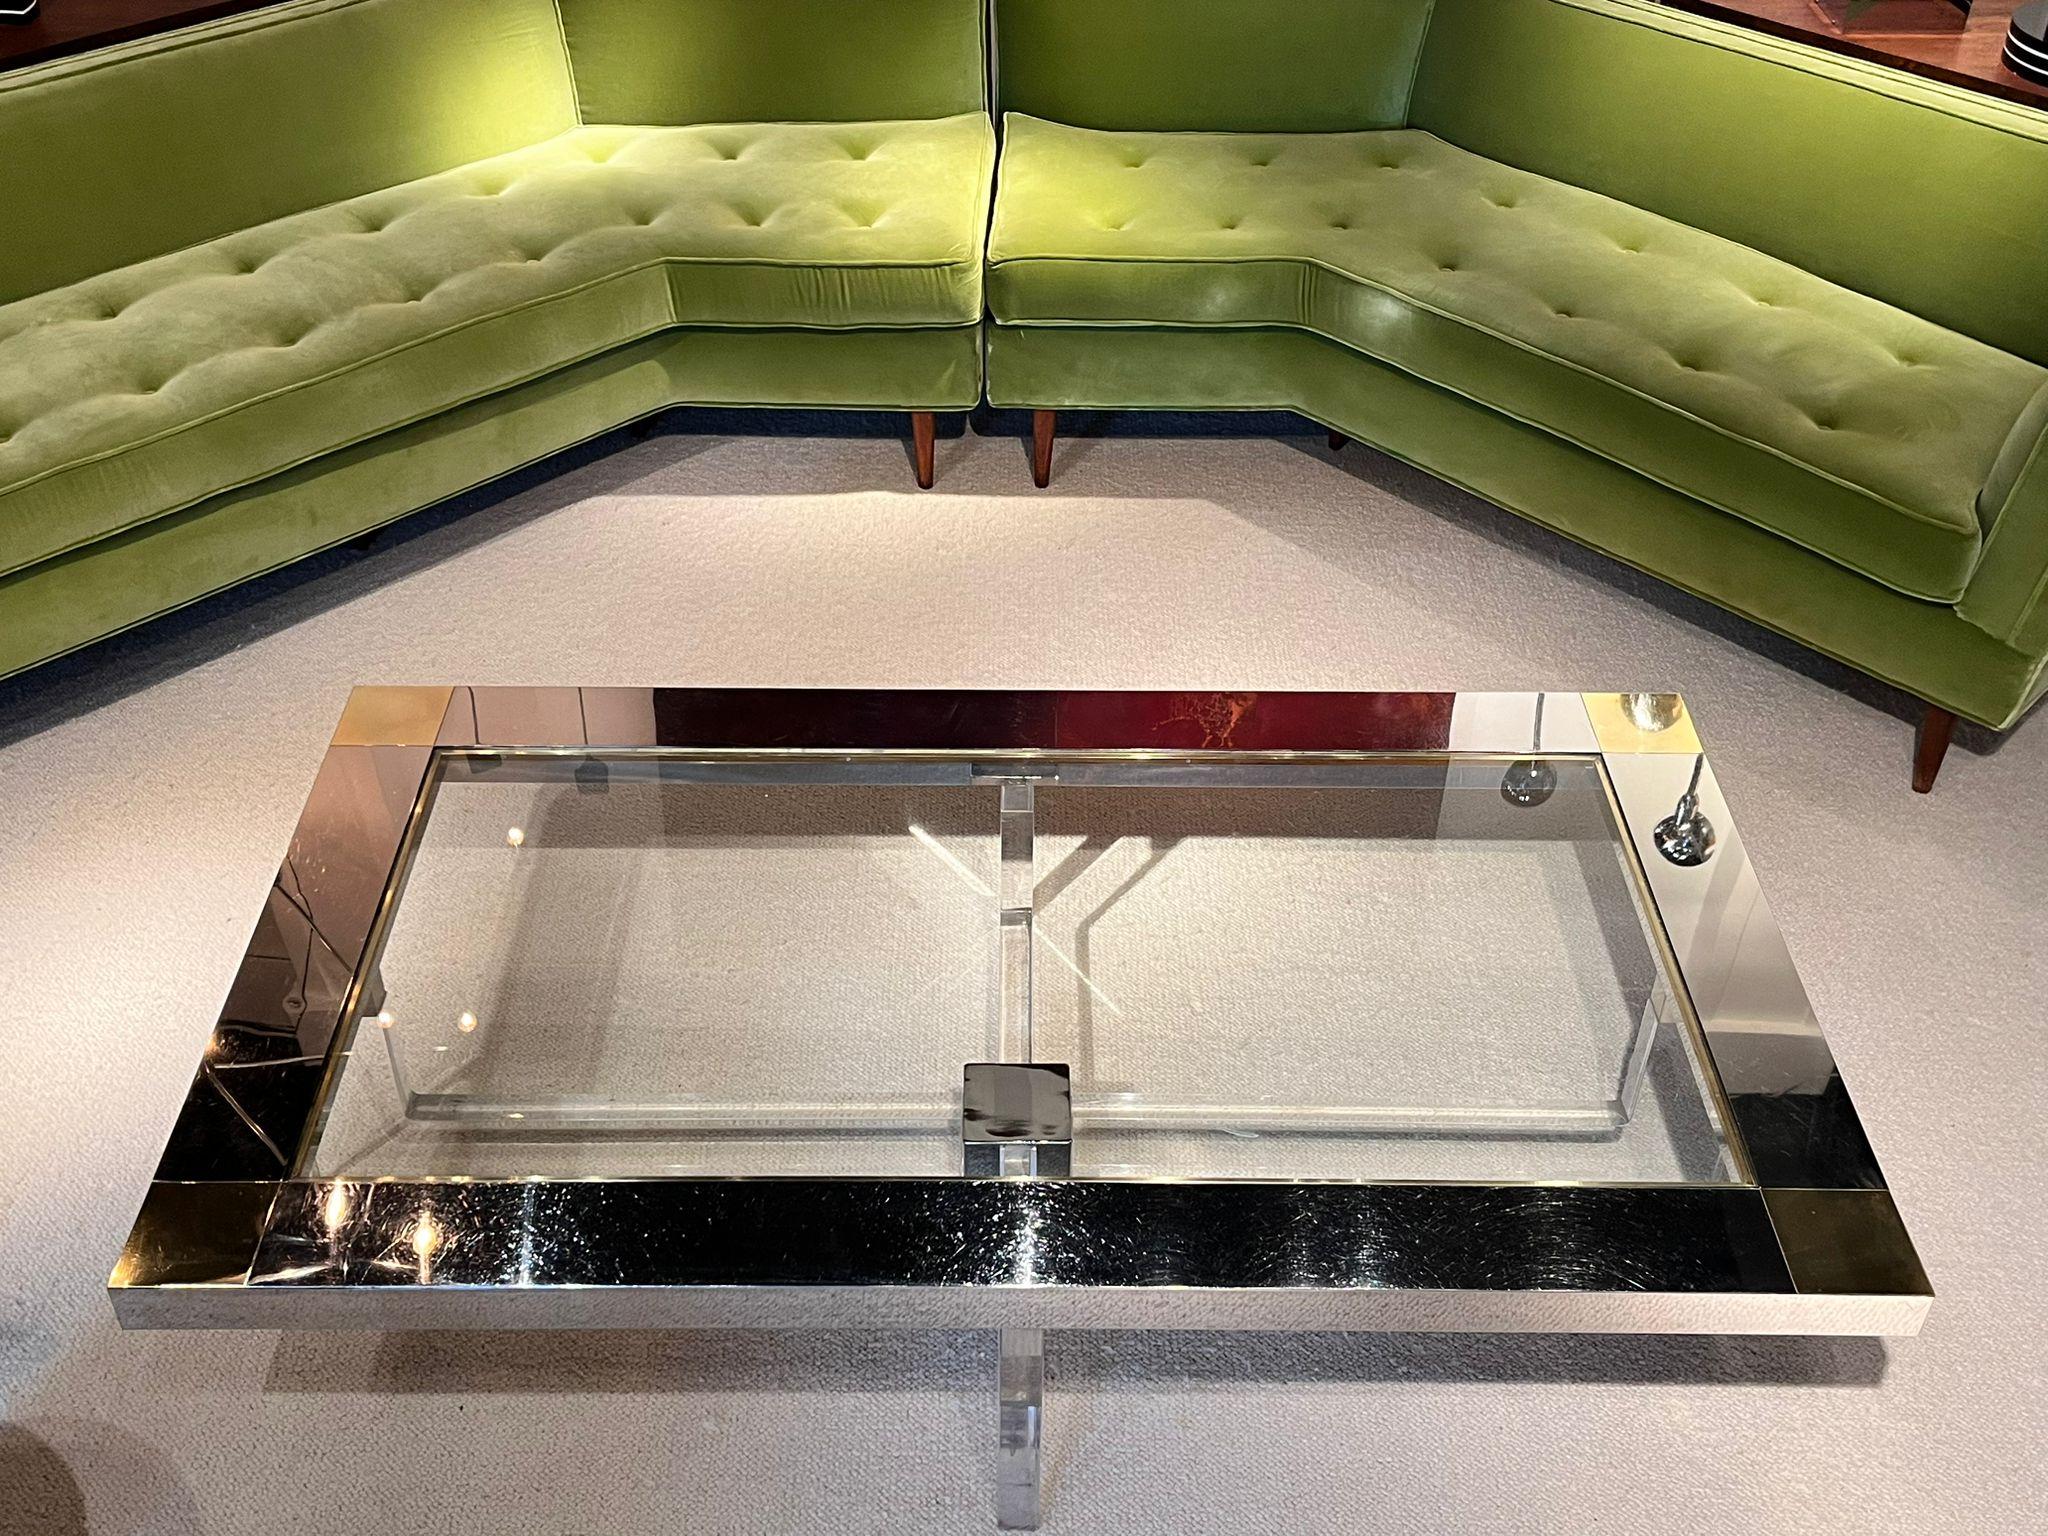 1970s Coffee table with glass top
Chrome and brass details on the top.
Lucite feet.
Designed by Sandro Petti, architect.
Italy, 1970
90x 160 × 38 cm